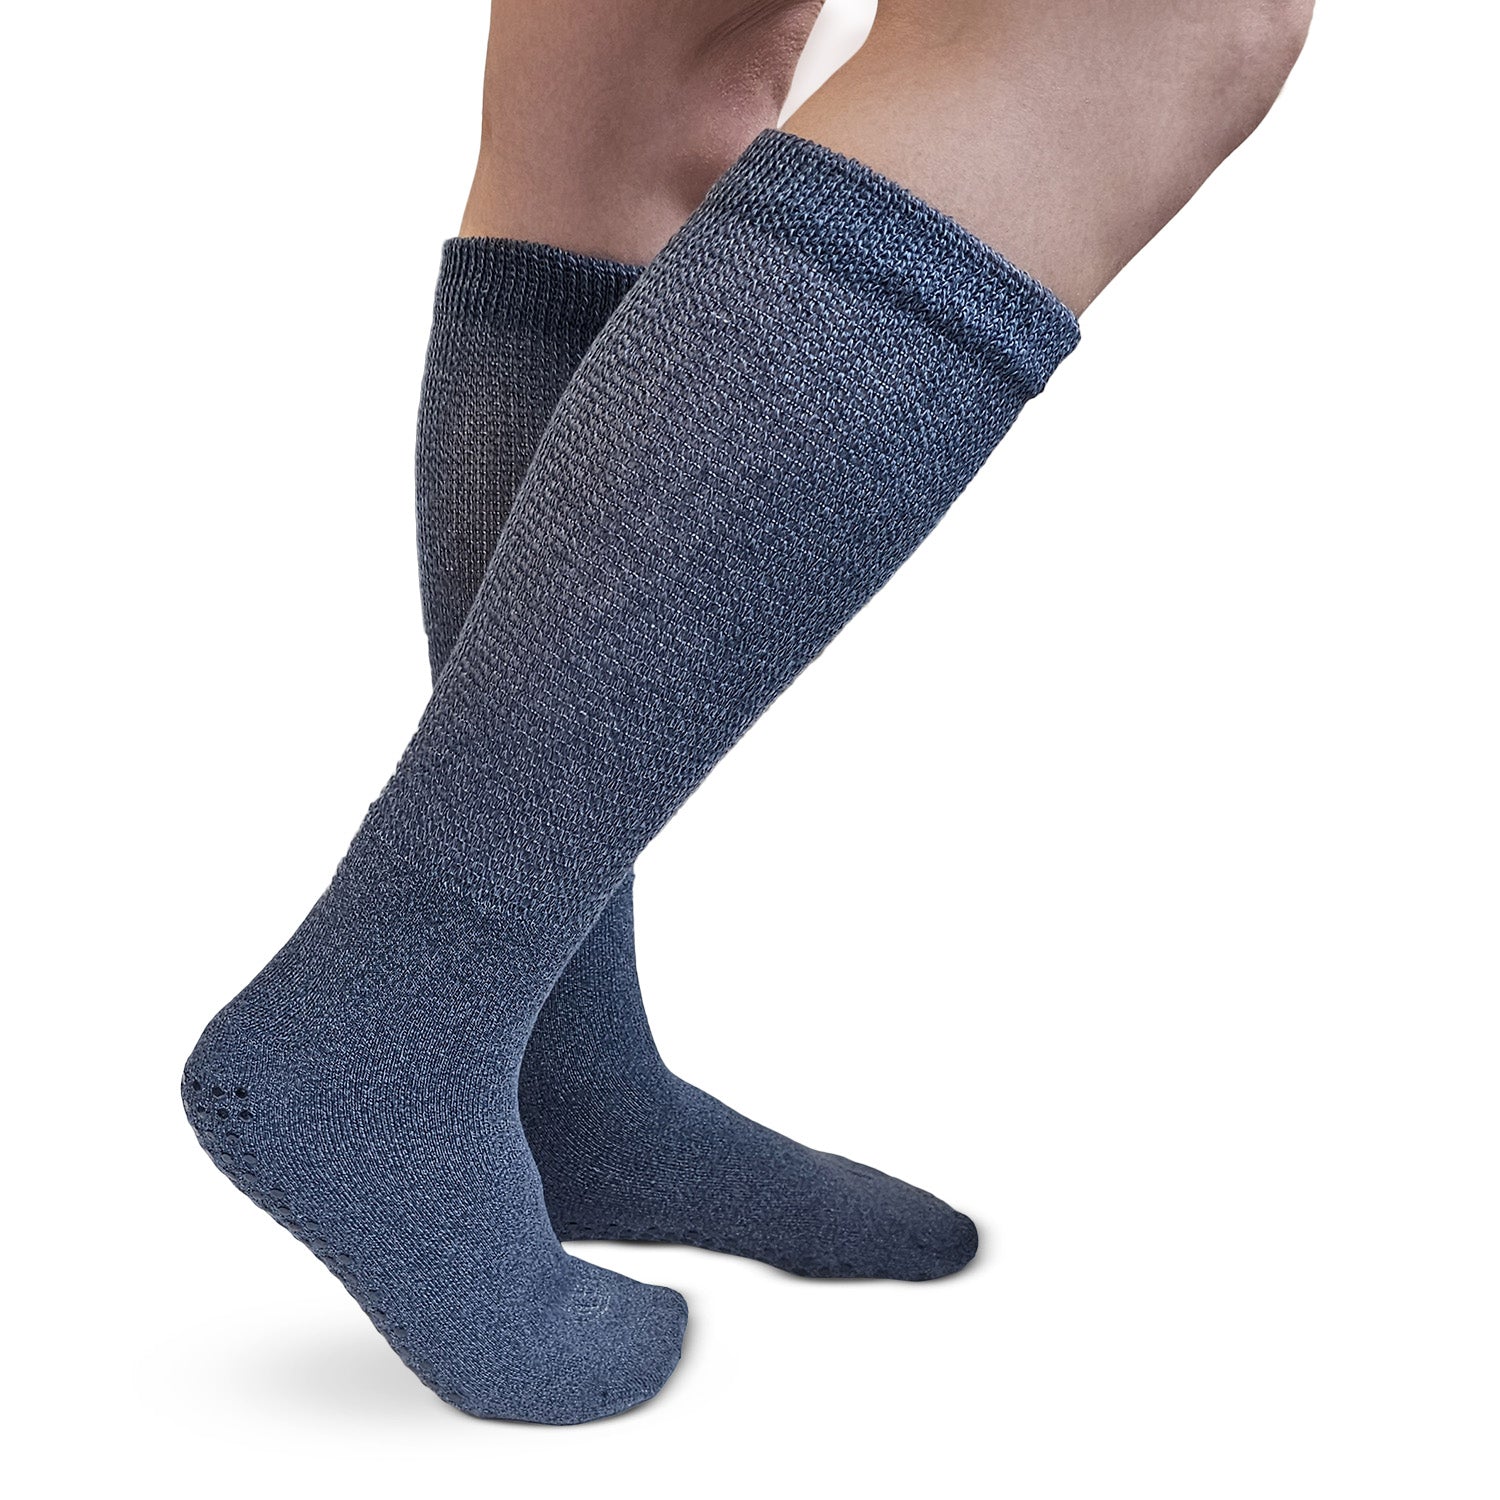 Ultra Comfort Diabetic Socks with Non-Slip Grips - Mix Color (3